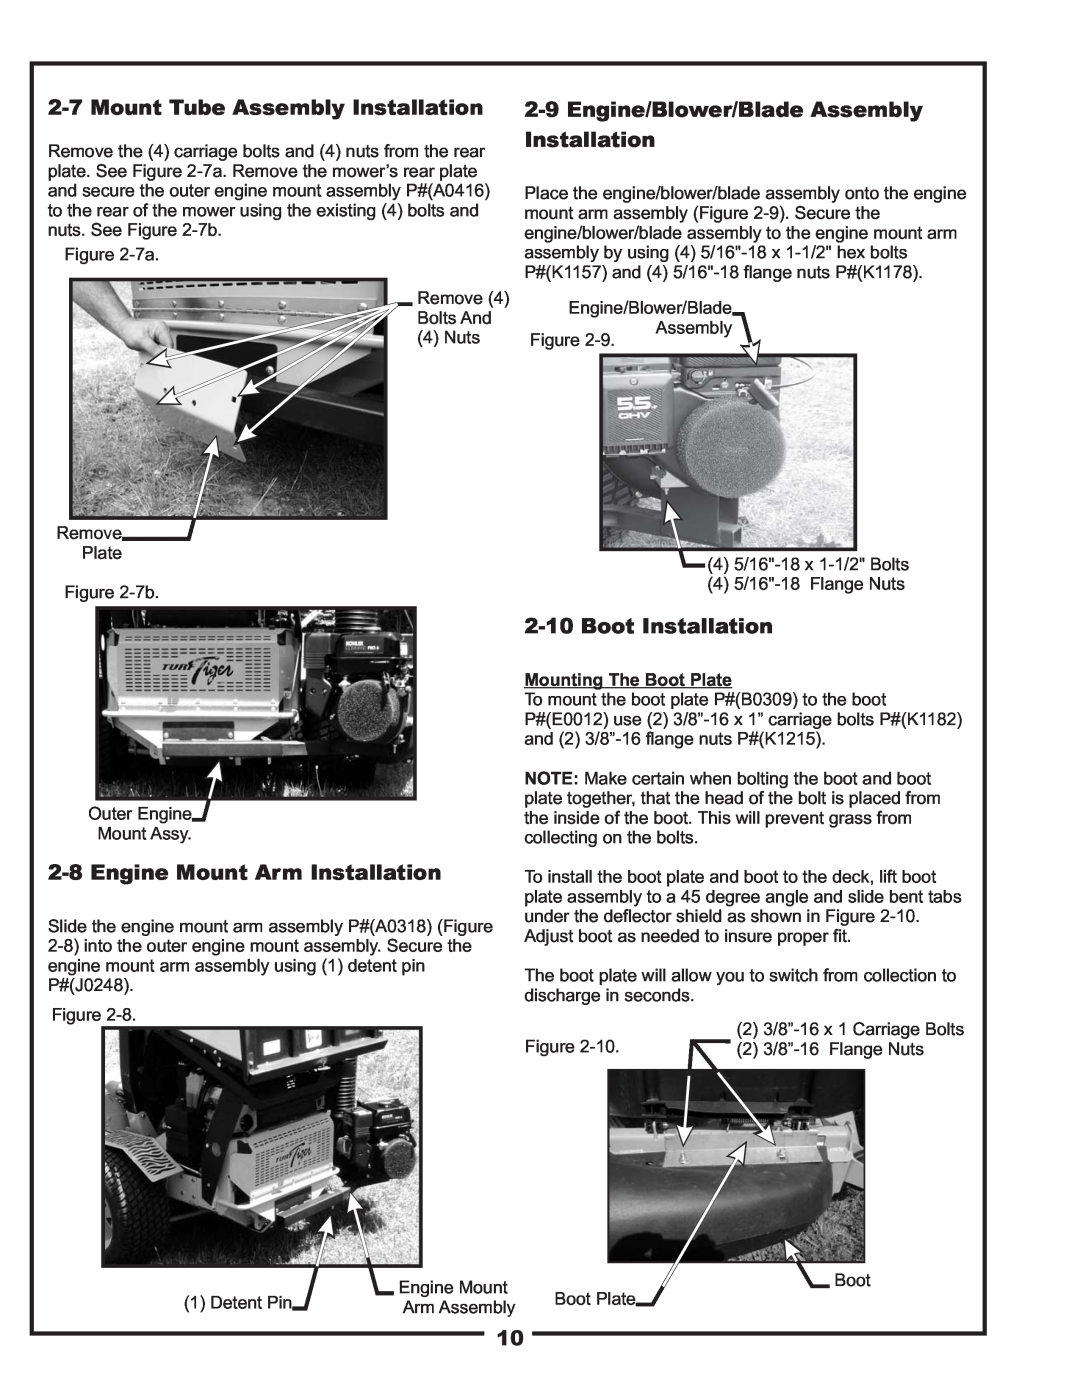 Scag Power Equipment 37621220 manual Mount Tube Assembly Installation, Engine/Blower/Blade Assembly Installation 